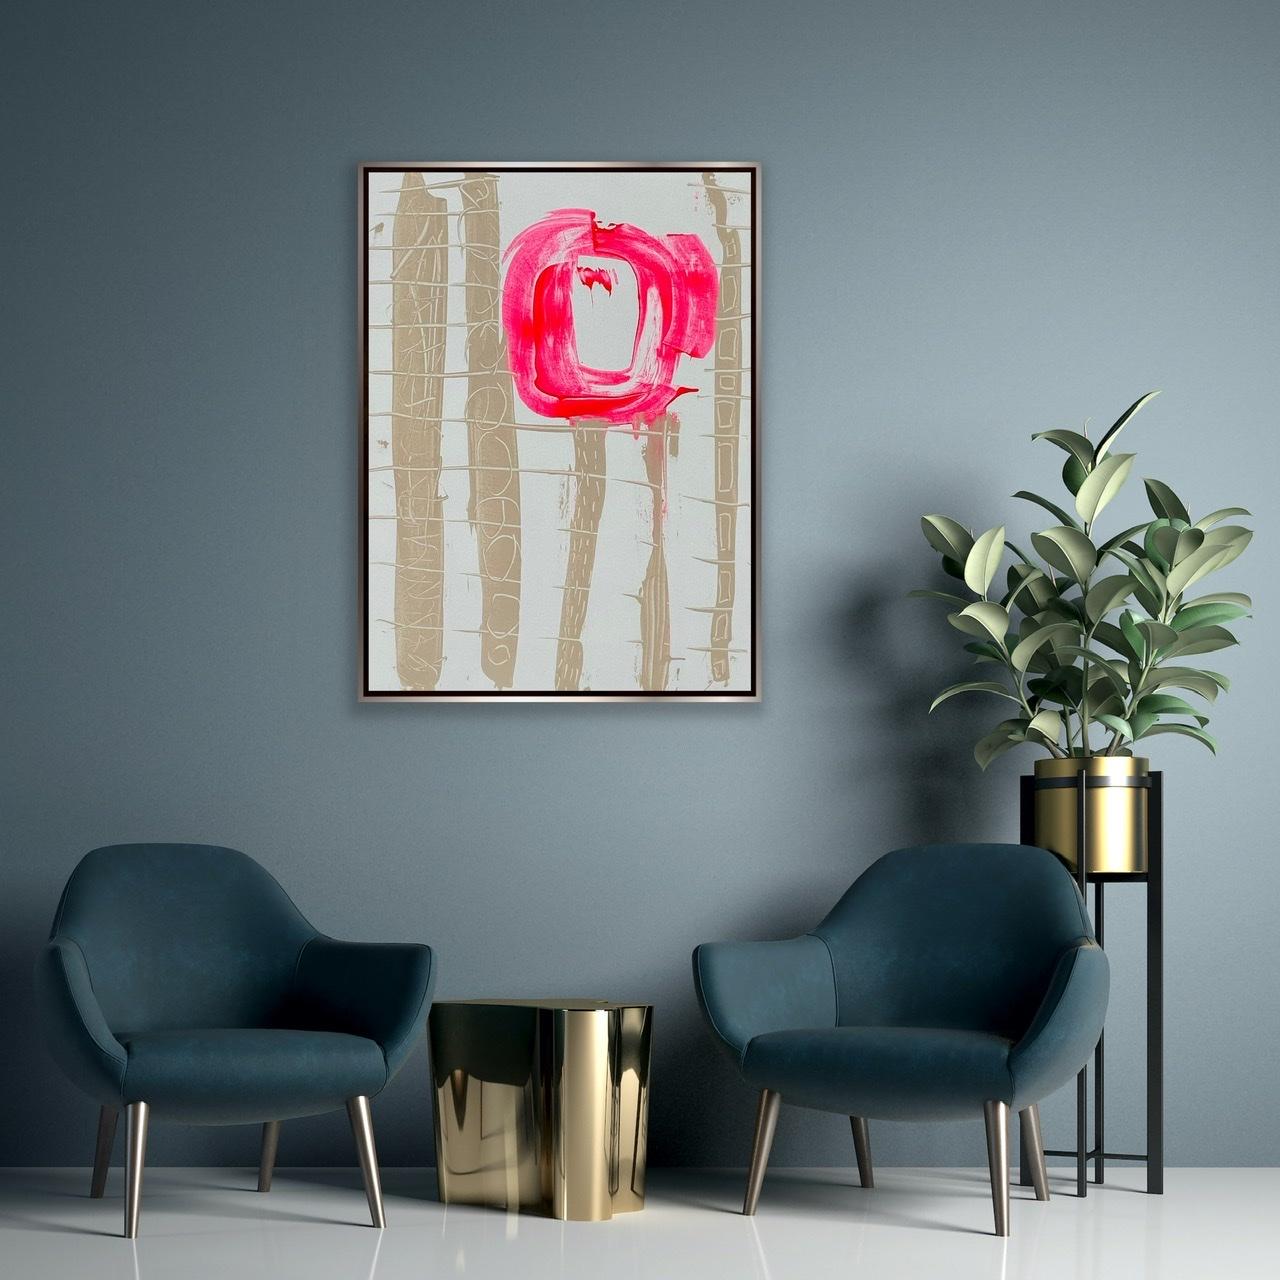 Blood Moon - Neo-Expressionist Painting by ETTE